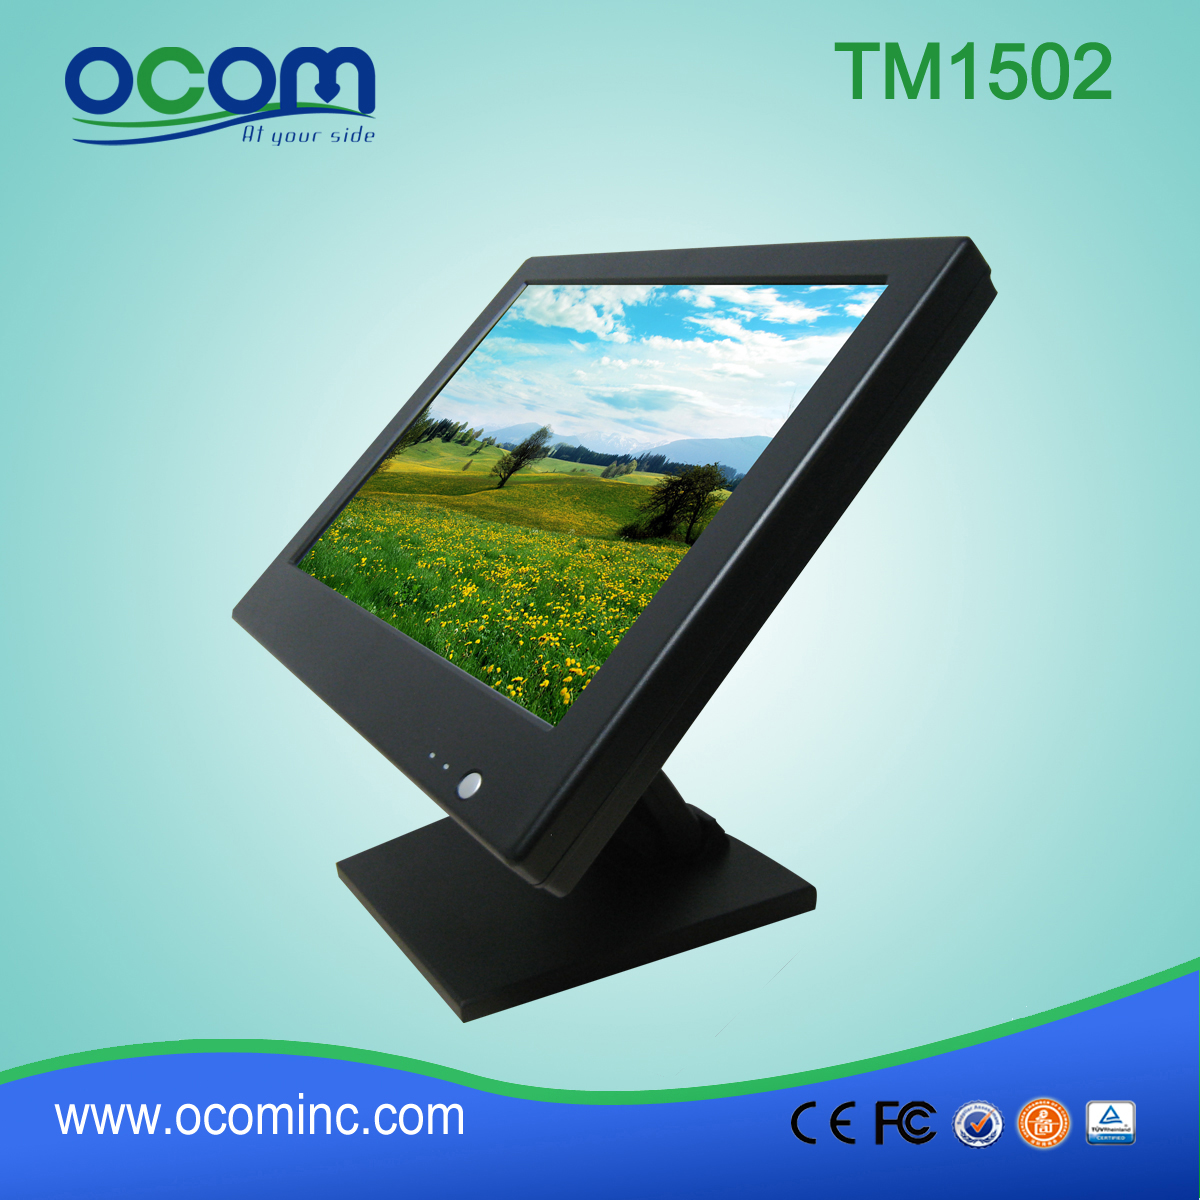 TM1502 15 "4 Wire Resistive Touch Screen Monitor